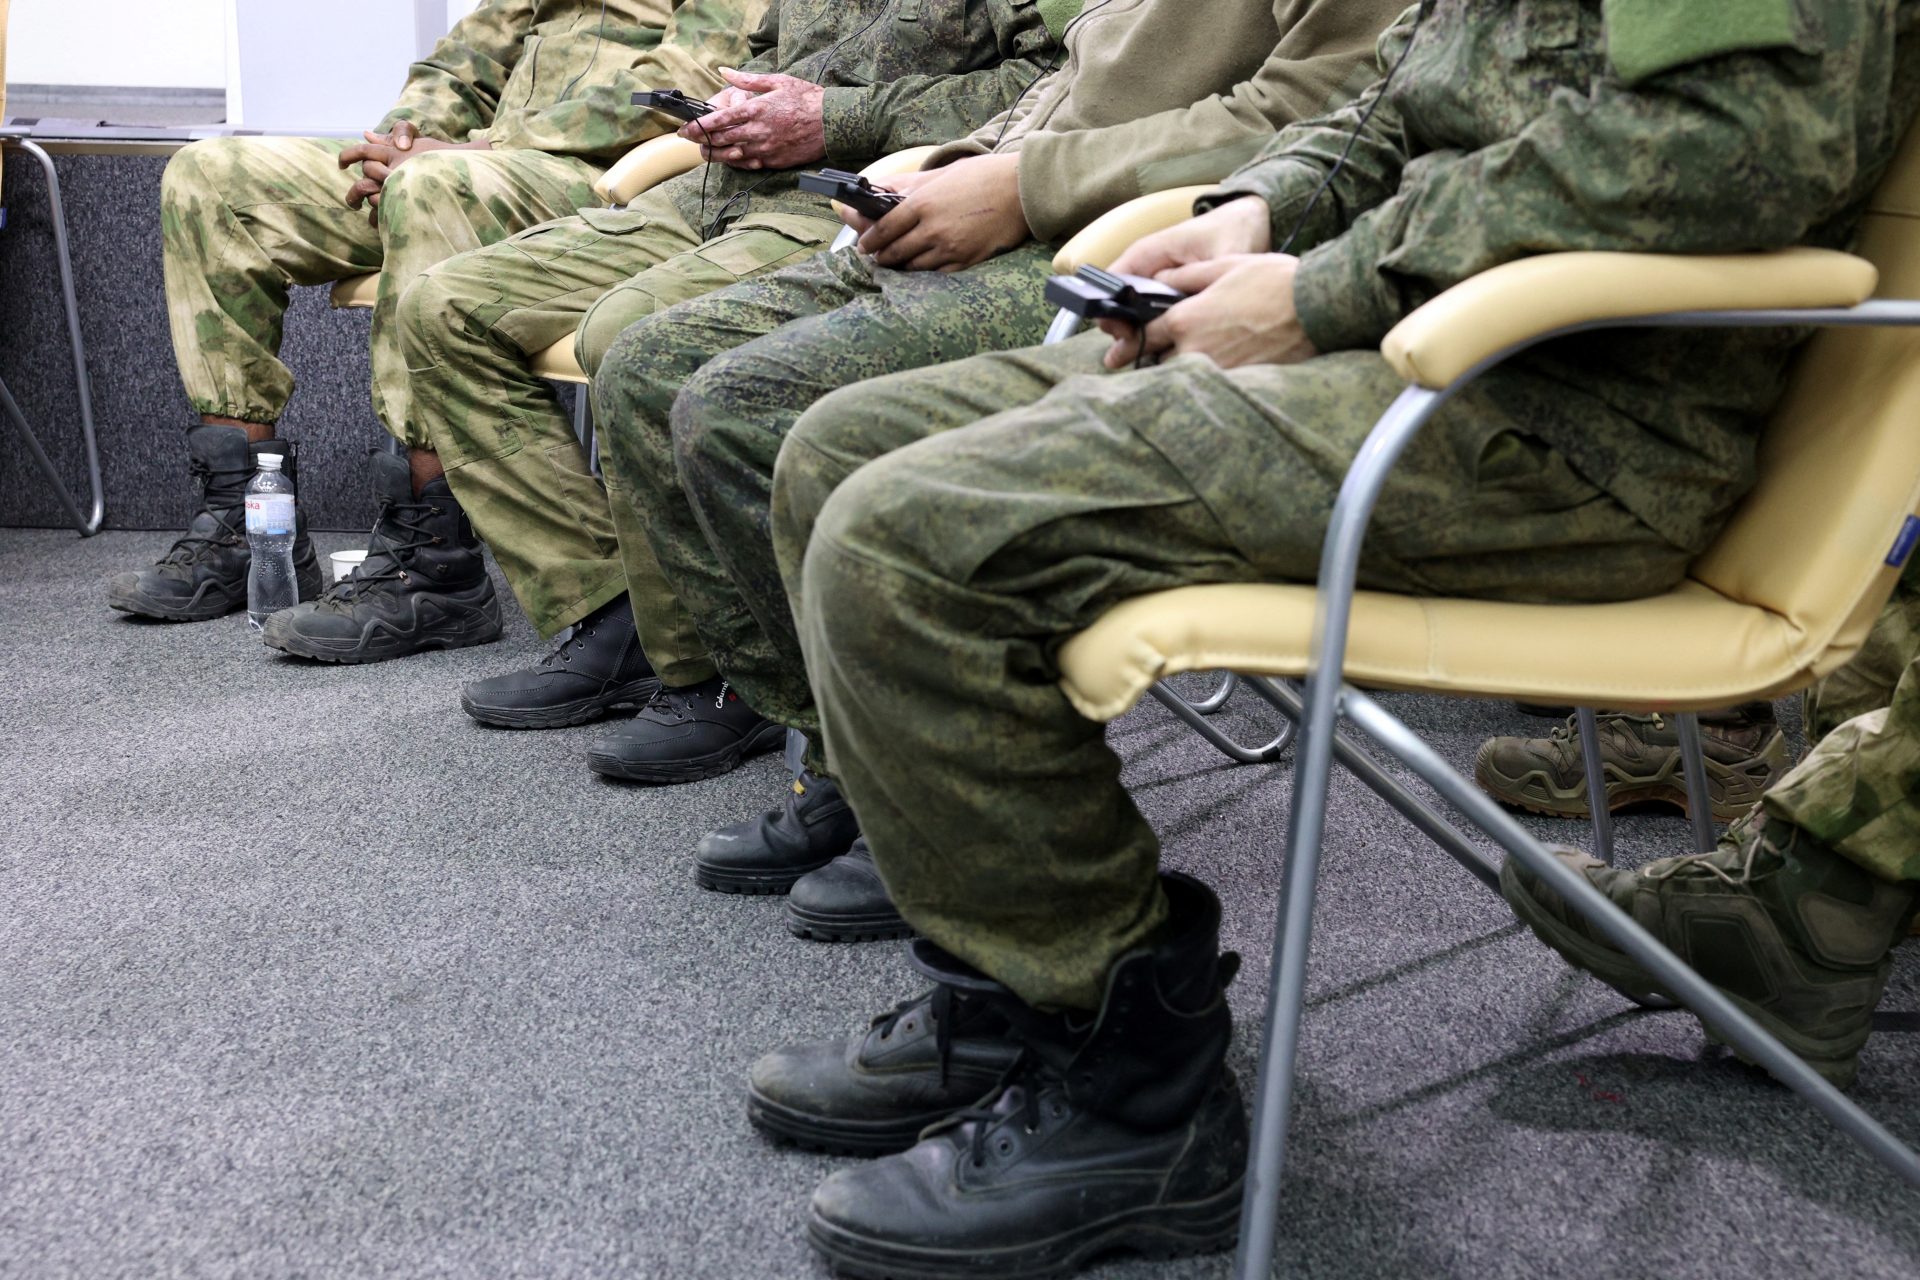 Ukraine launched a program to exchange traitors for prisoners of war